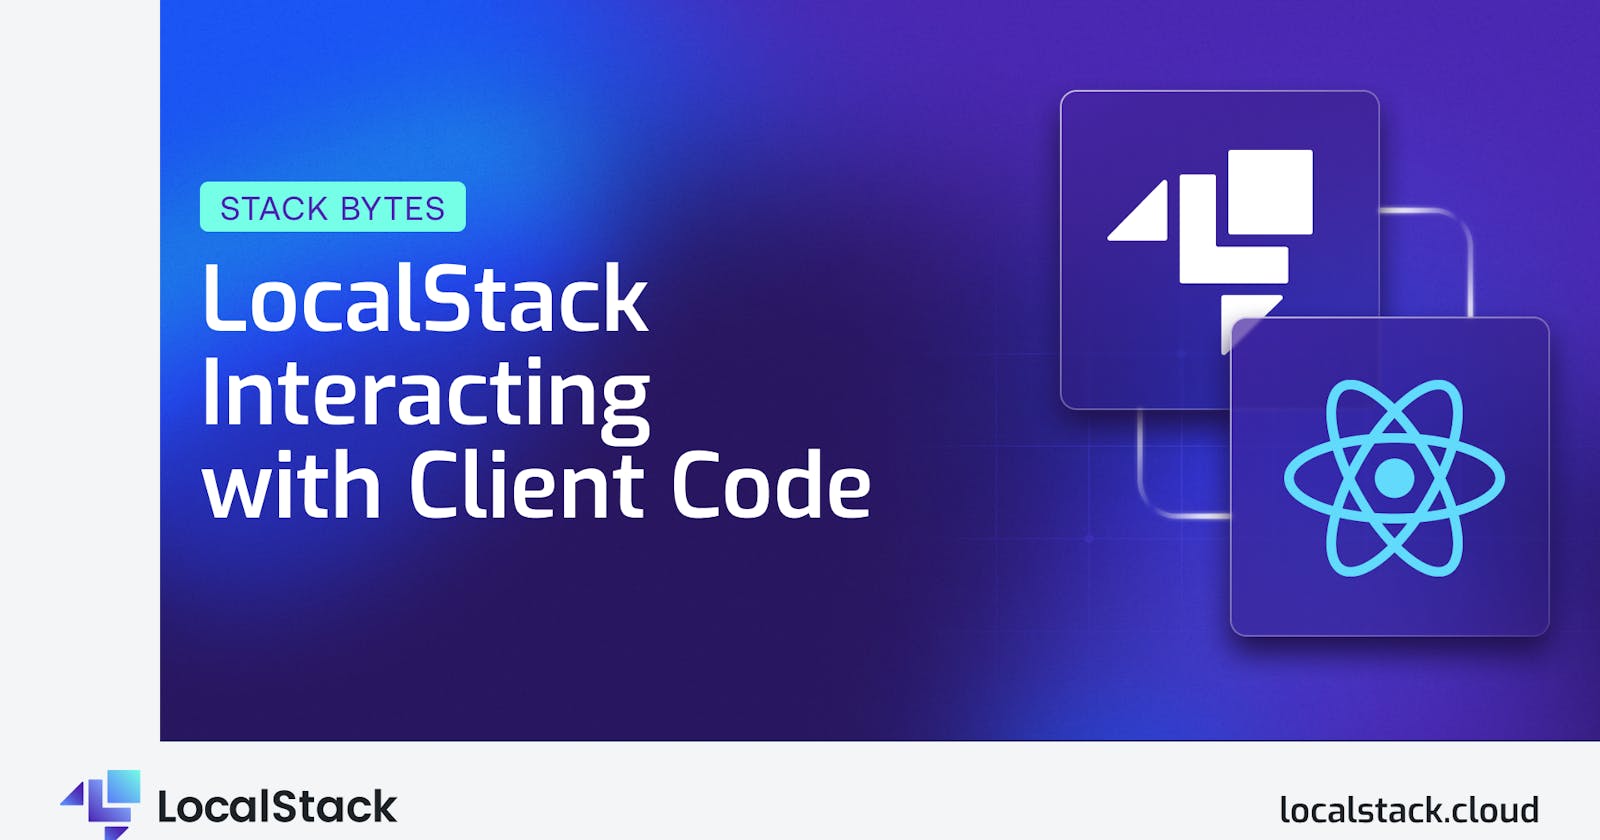 LocalStack Interacting with Client Code